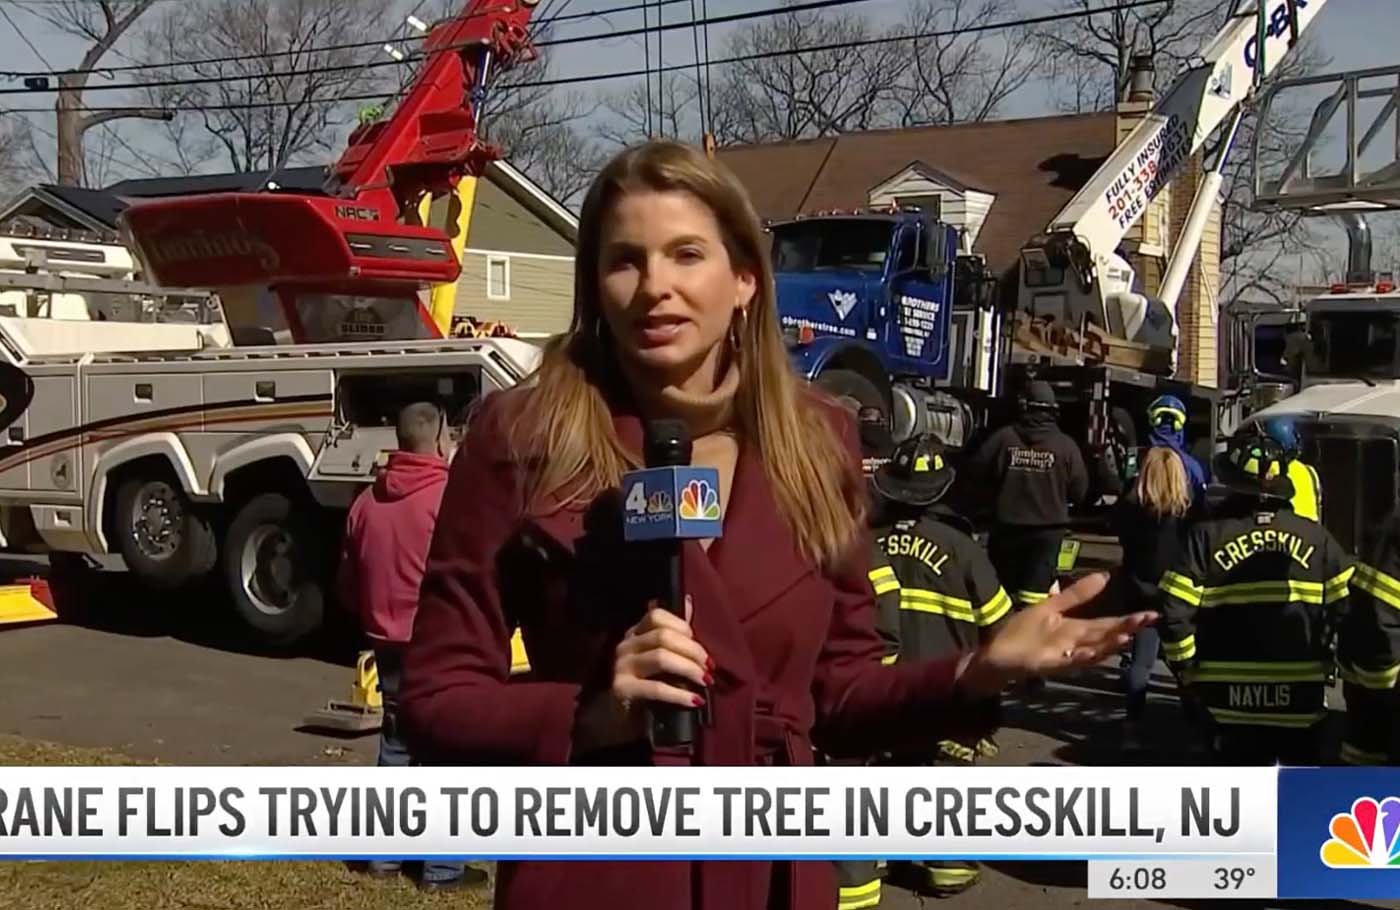 Crane Flips Trying to Remove Tree in Cresskill, NJ